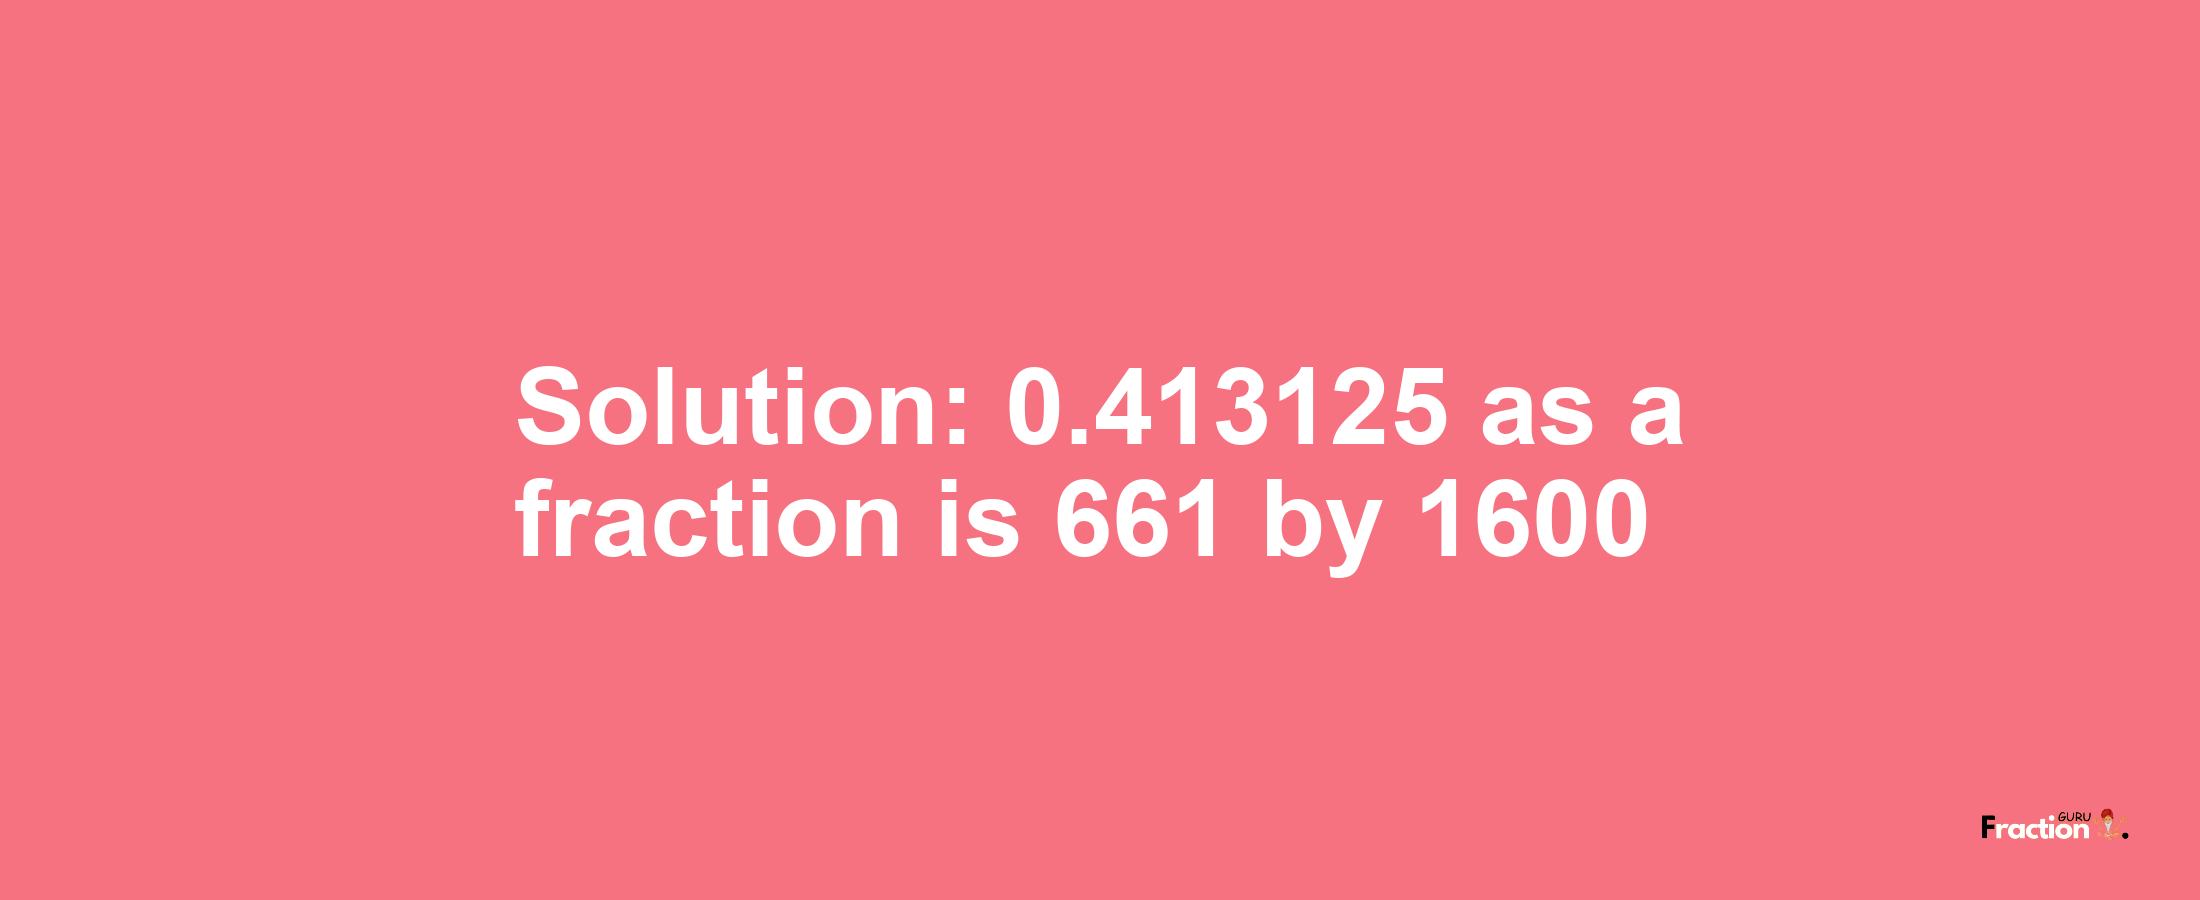 Solution:0.413125 as a fraction is 661/1600